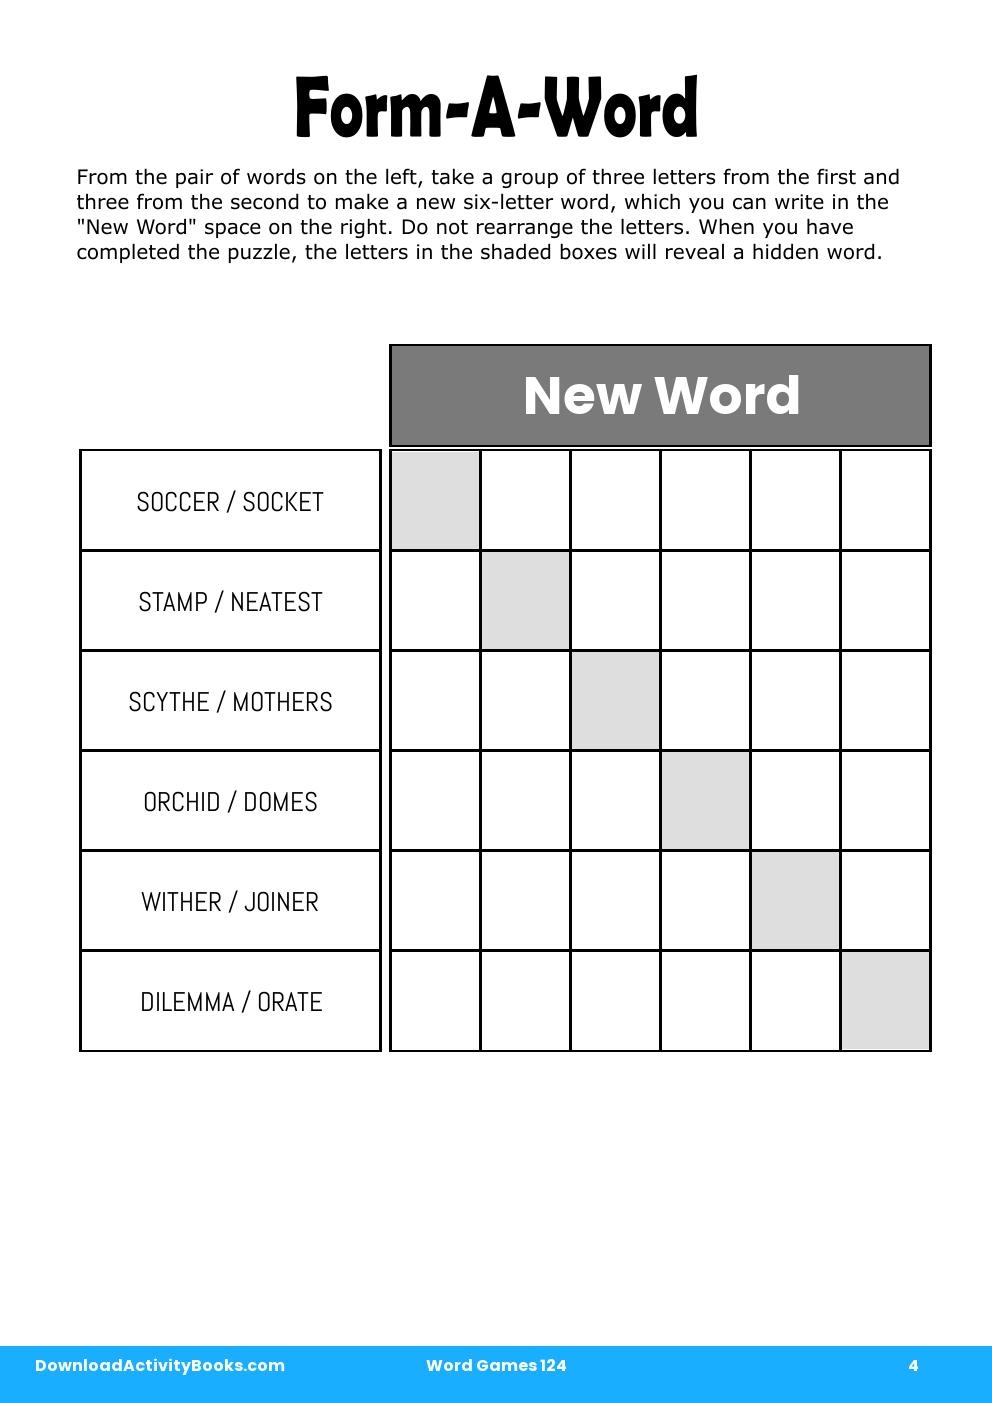 Form-A-Word in Word Games 124